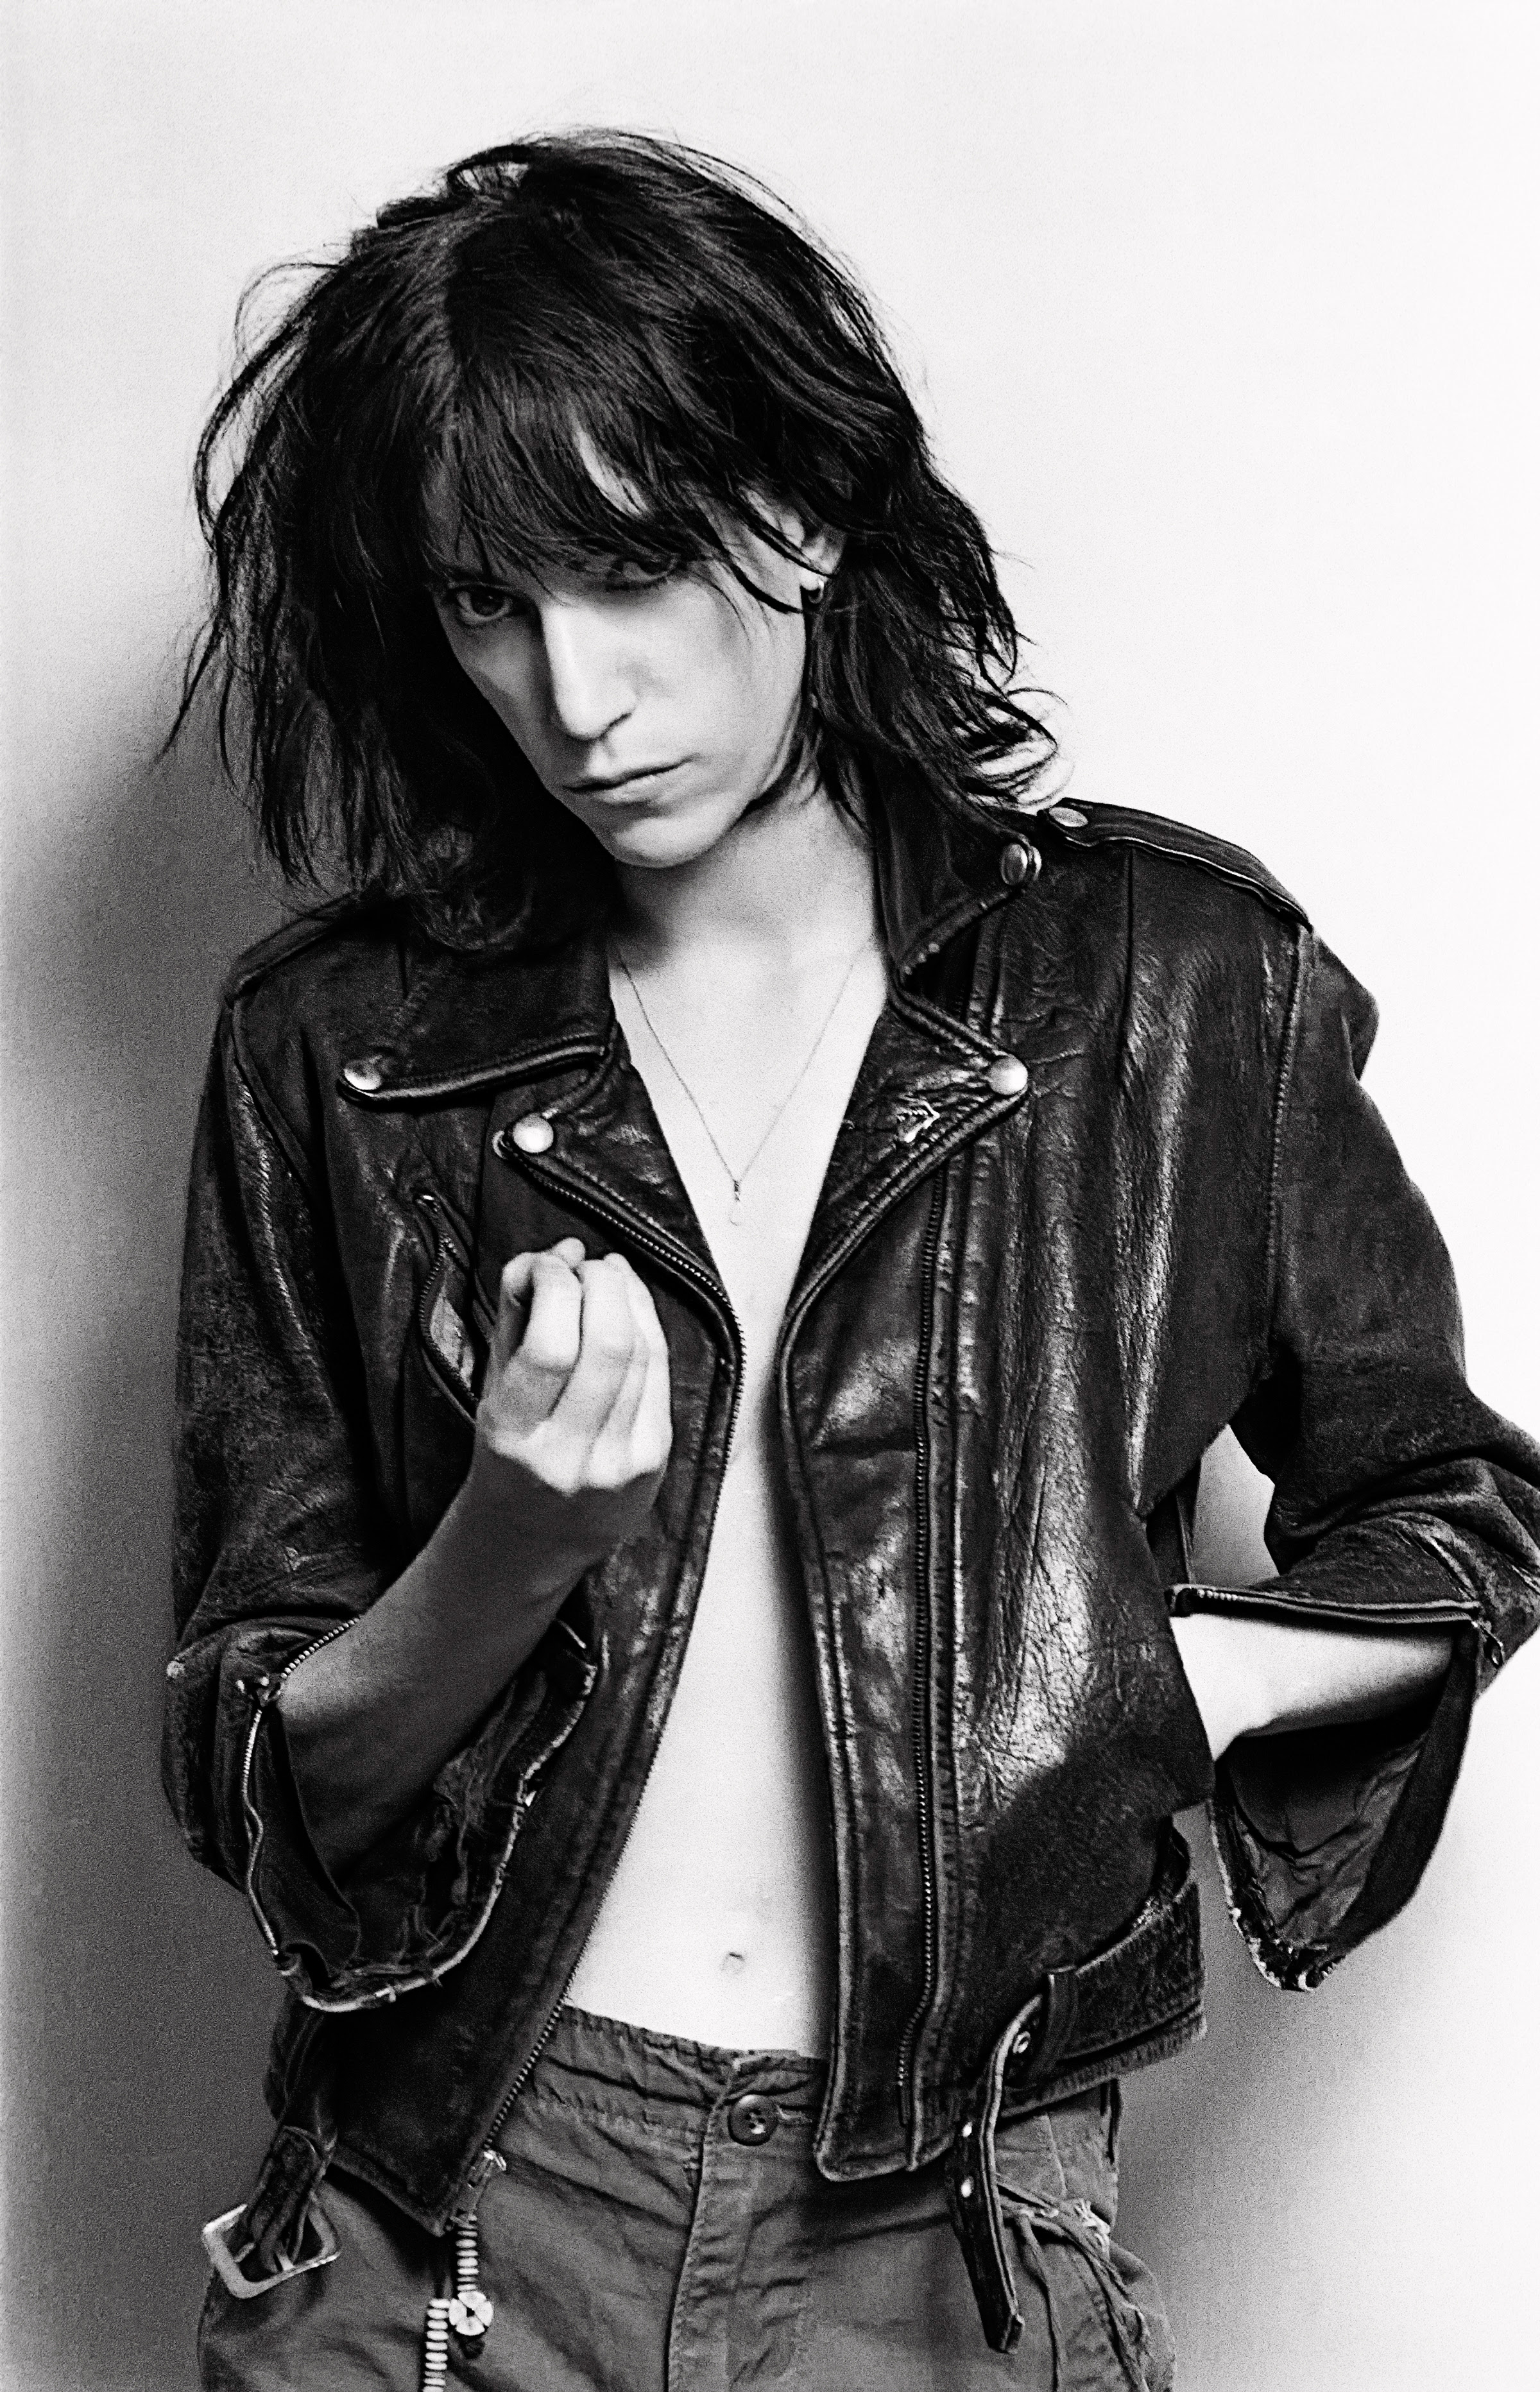 http://blog.wppionline.com/wp-content/uploads/2013/11/Rock-and-Roll-Stories_Patti-Smith_p358.jpg